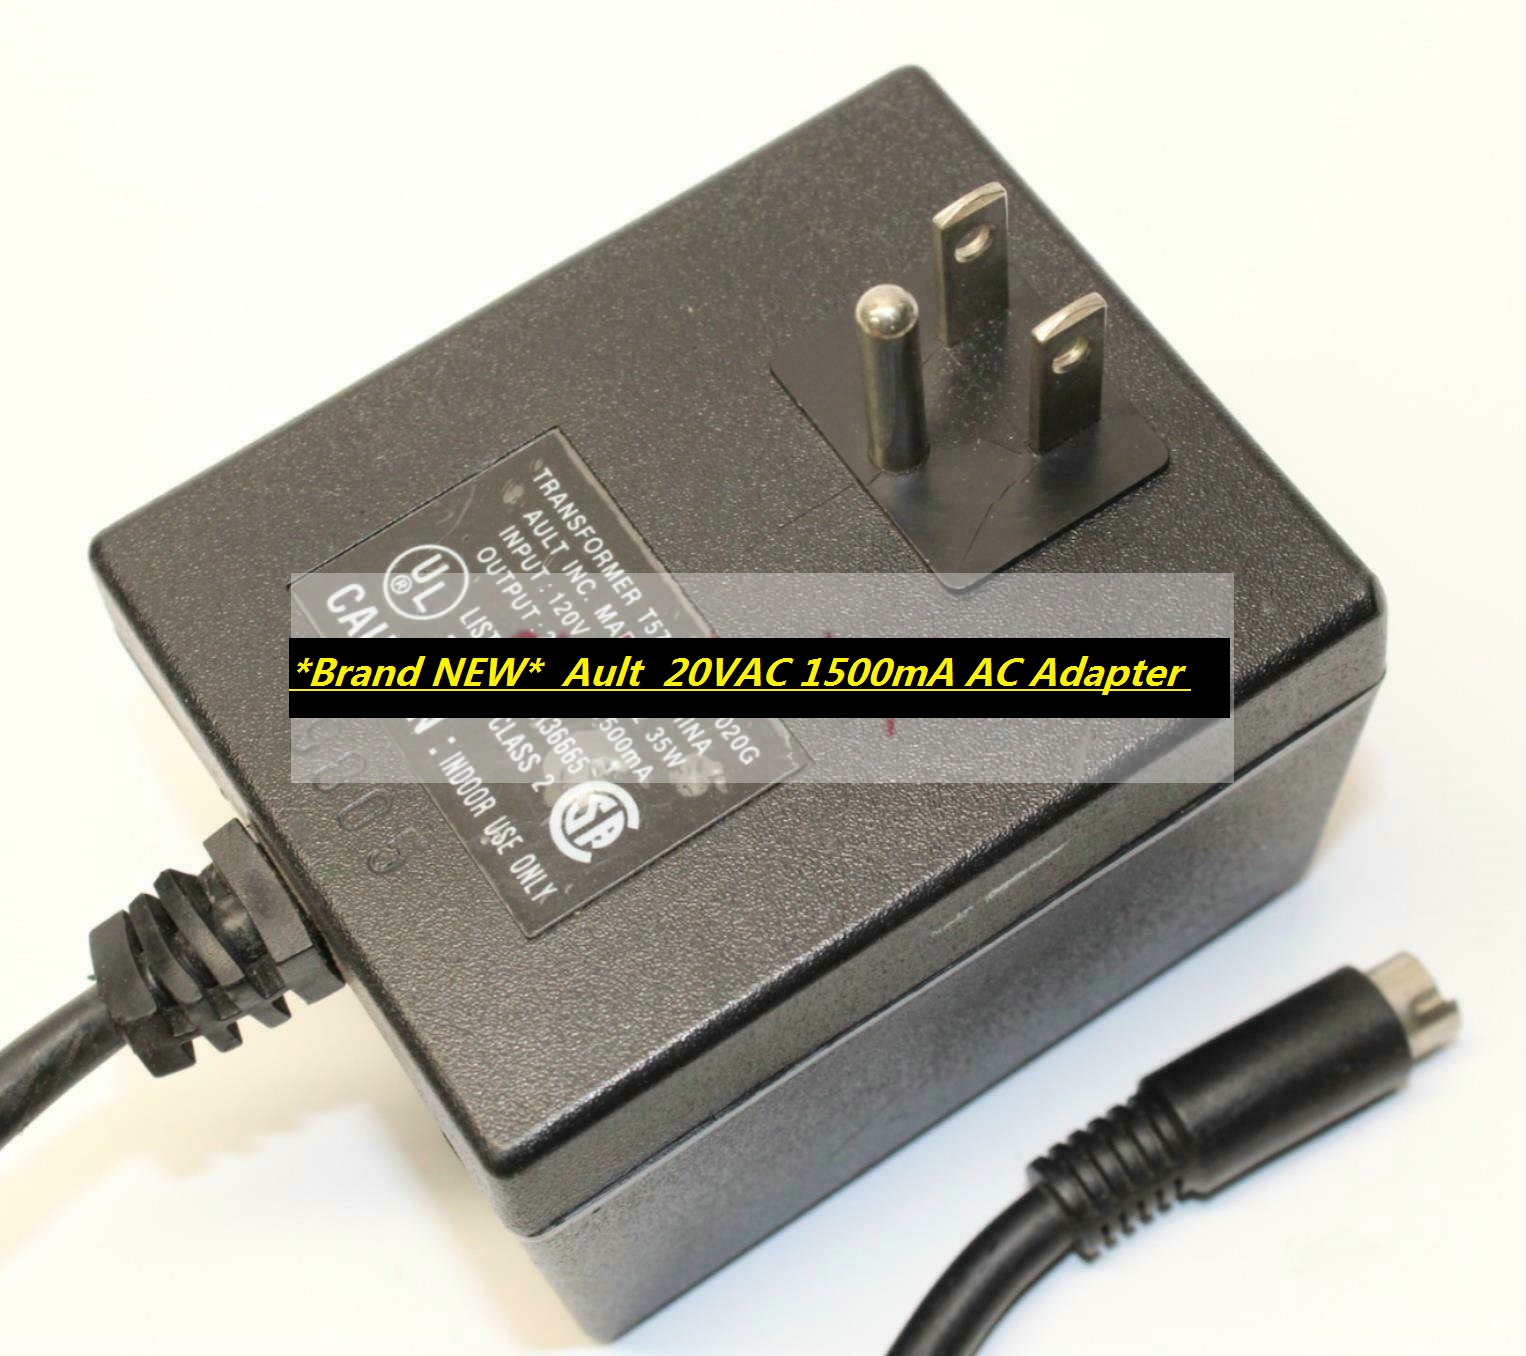 *Brand NEW* 20VAC 1500mA AC Adapter Ault T57201500C020G Class 2 Transformer Power Supply - Click Image to Close